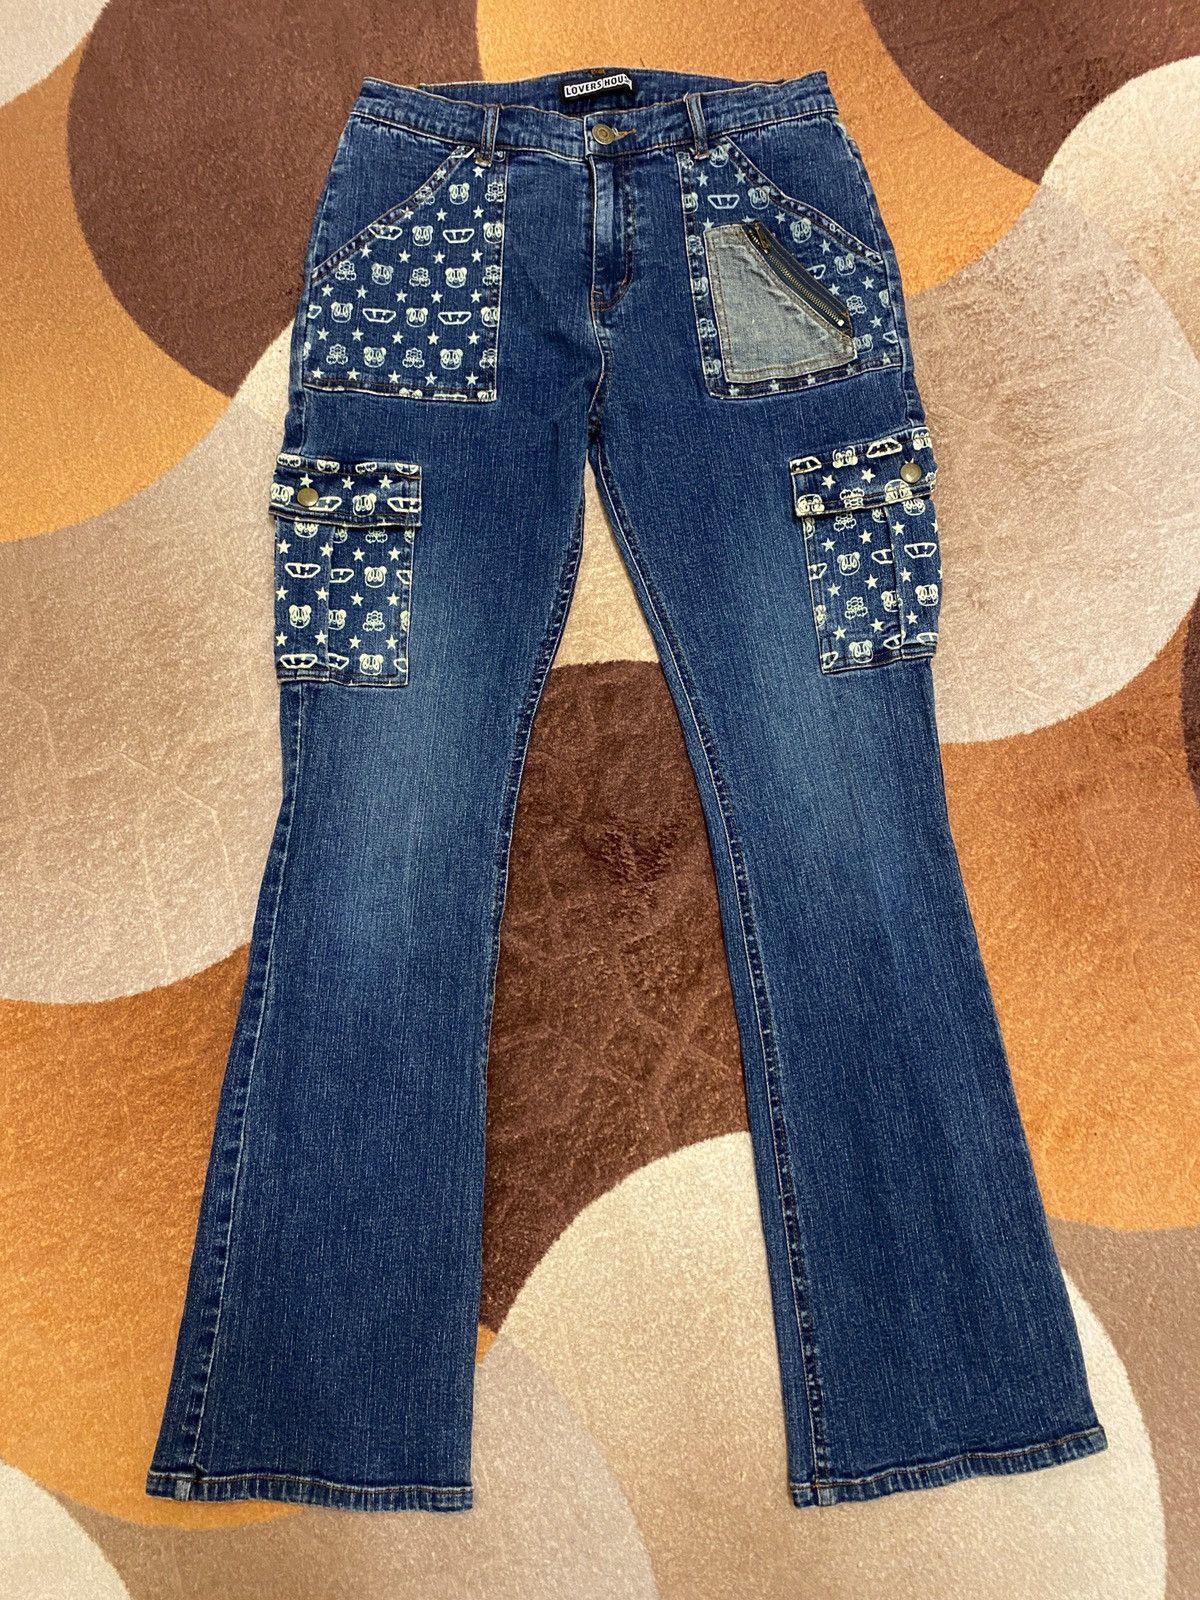 Japanese Brand - Super Lovers / Lovers House Bootcut Jeans - 1